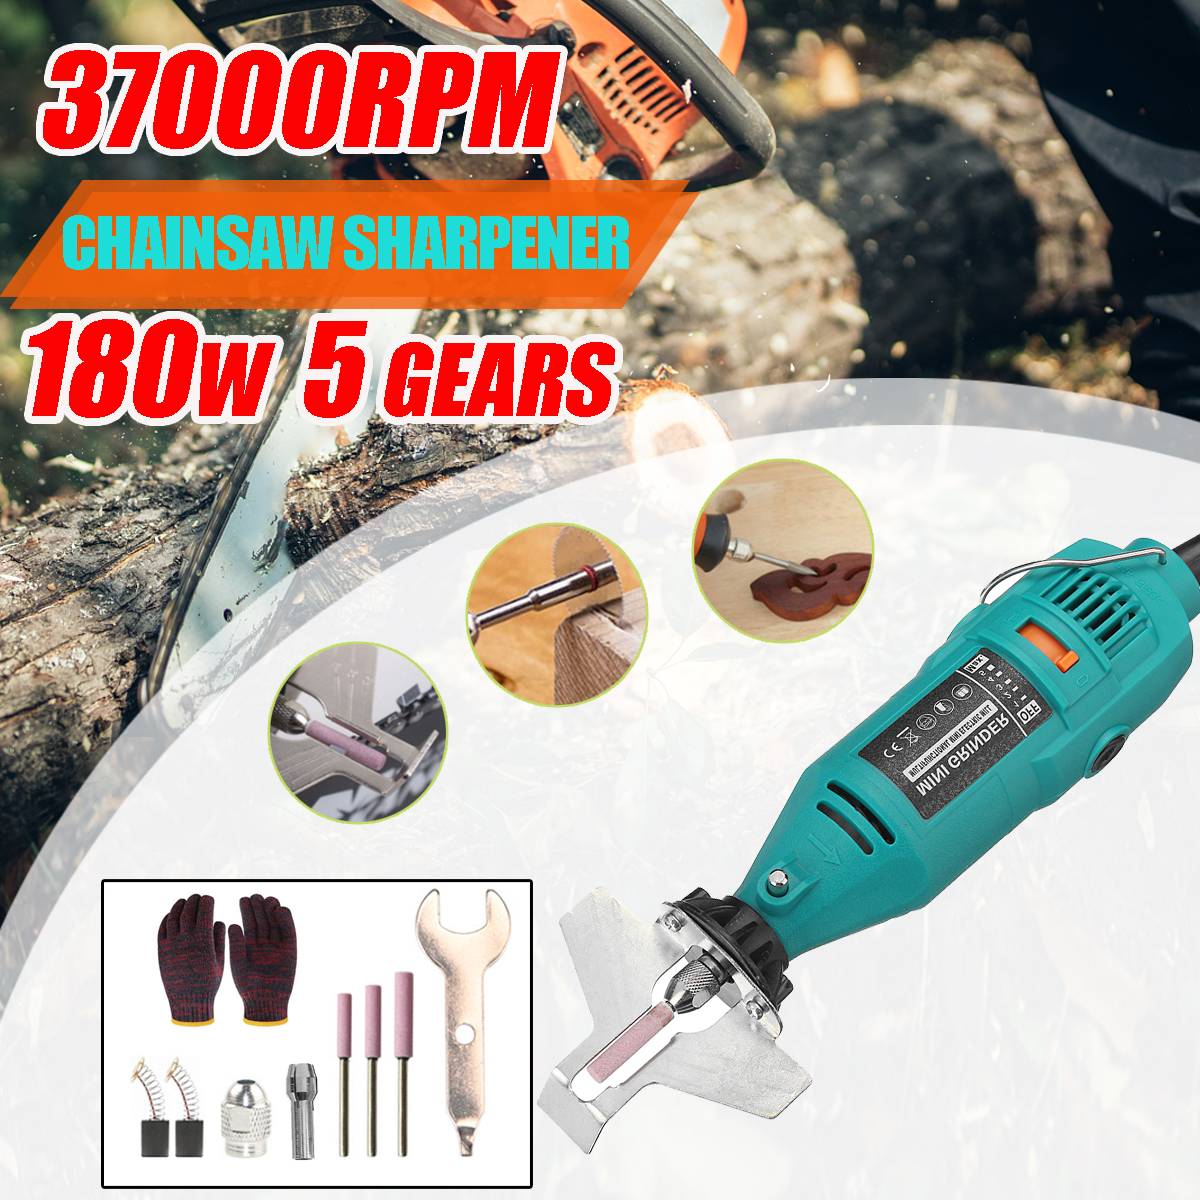 180W-5-Speed-37000rpm-Electric-Chainsaw-Sharpener-Grinder-Chain-Saw-File-Pro-Tool-Set-1885451-1